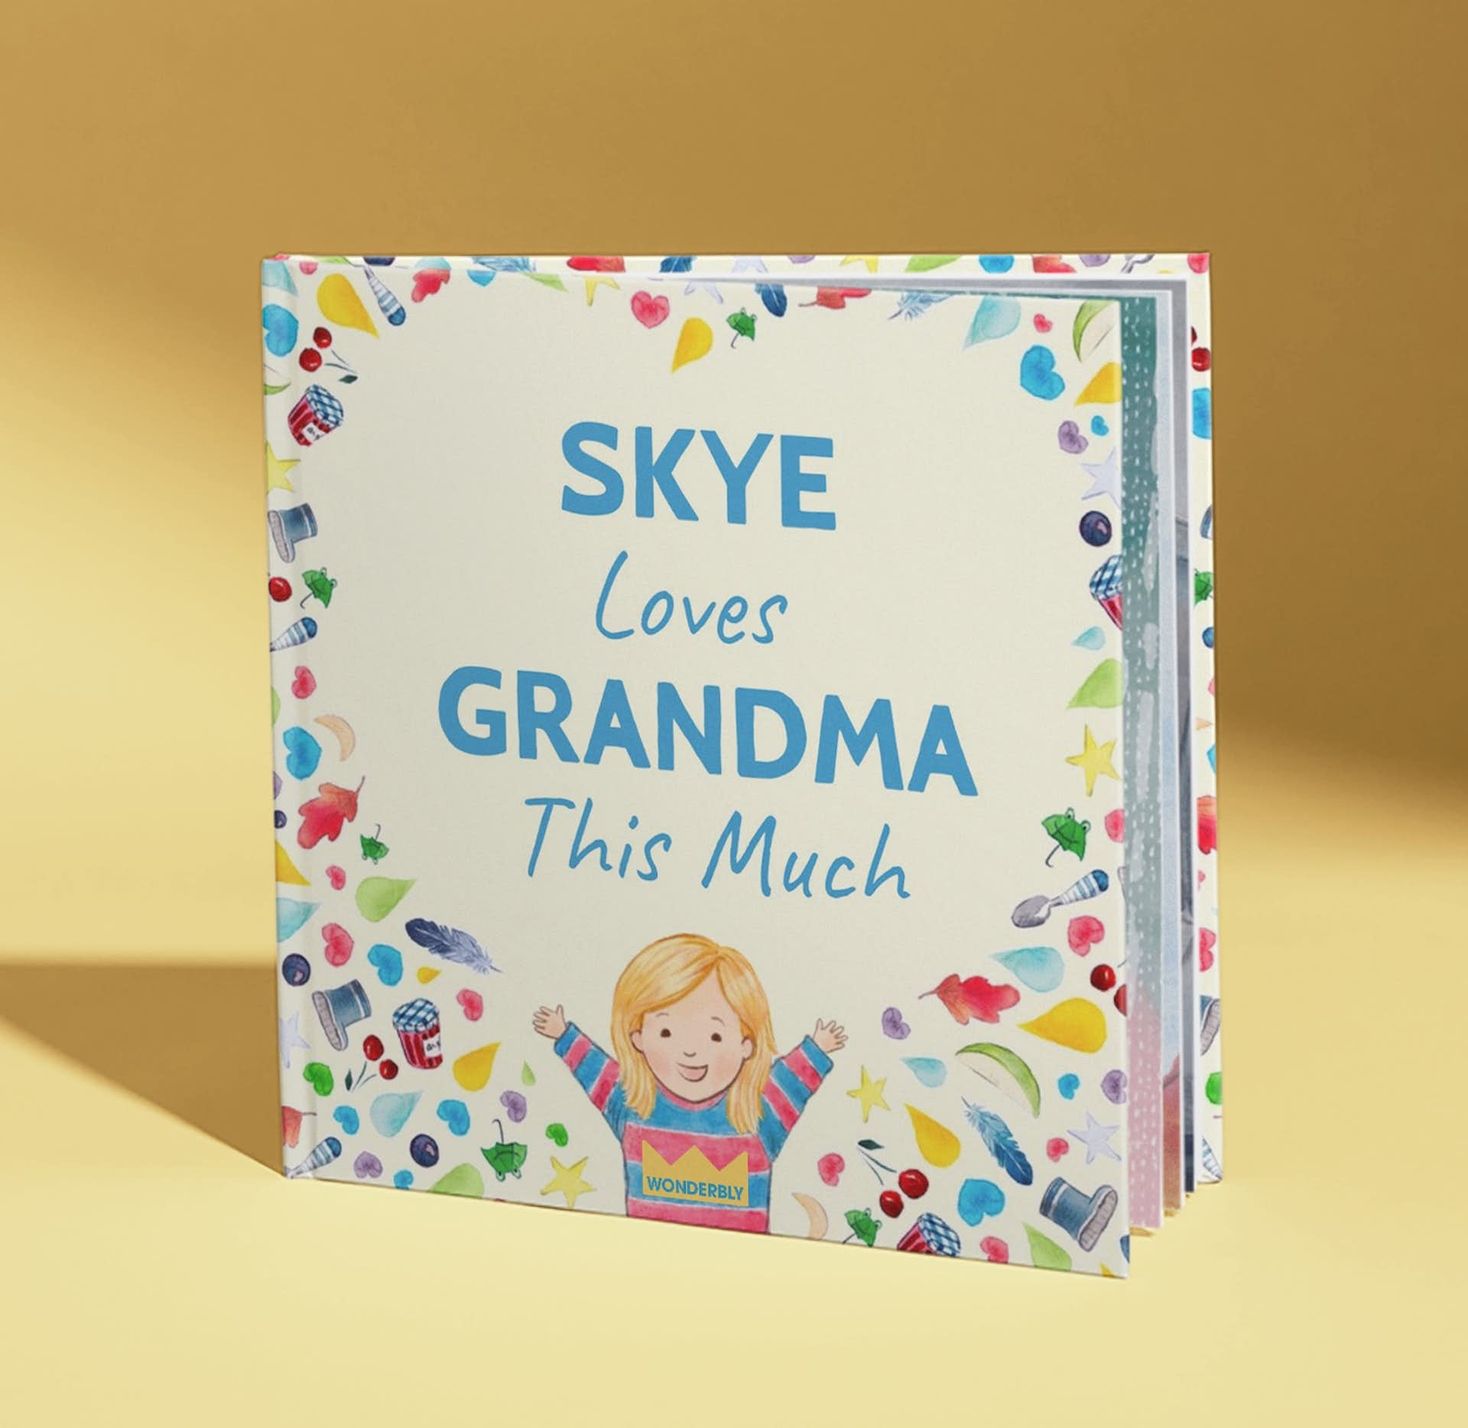 37 Best Gifts for Grandparents That'll Make Them Feel Extra Loved